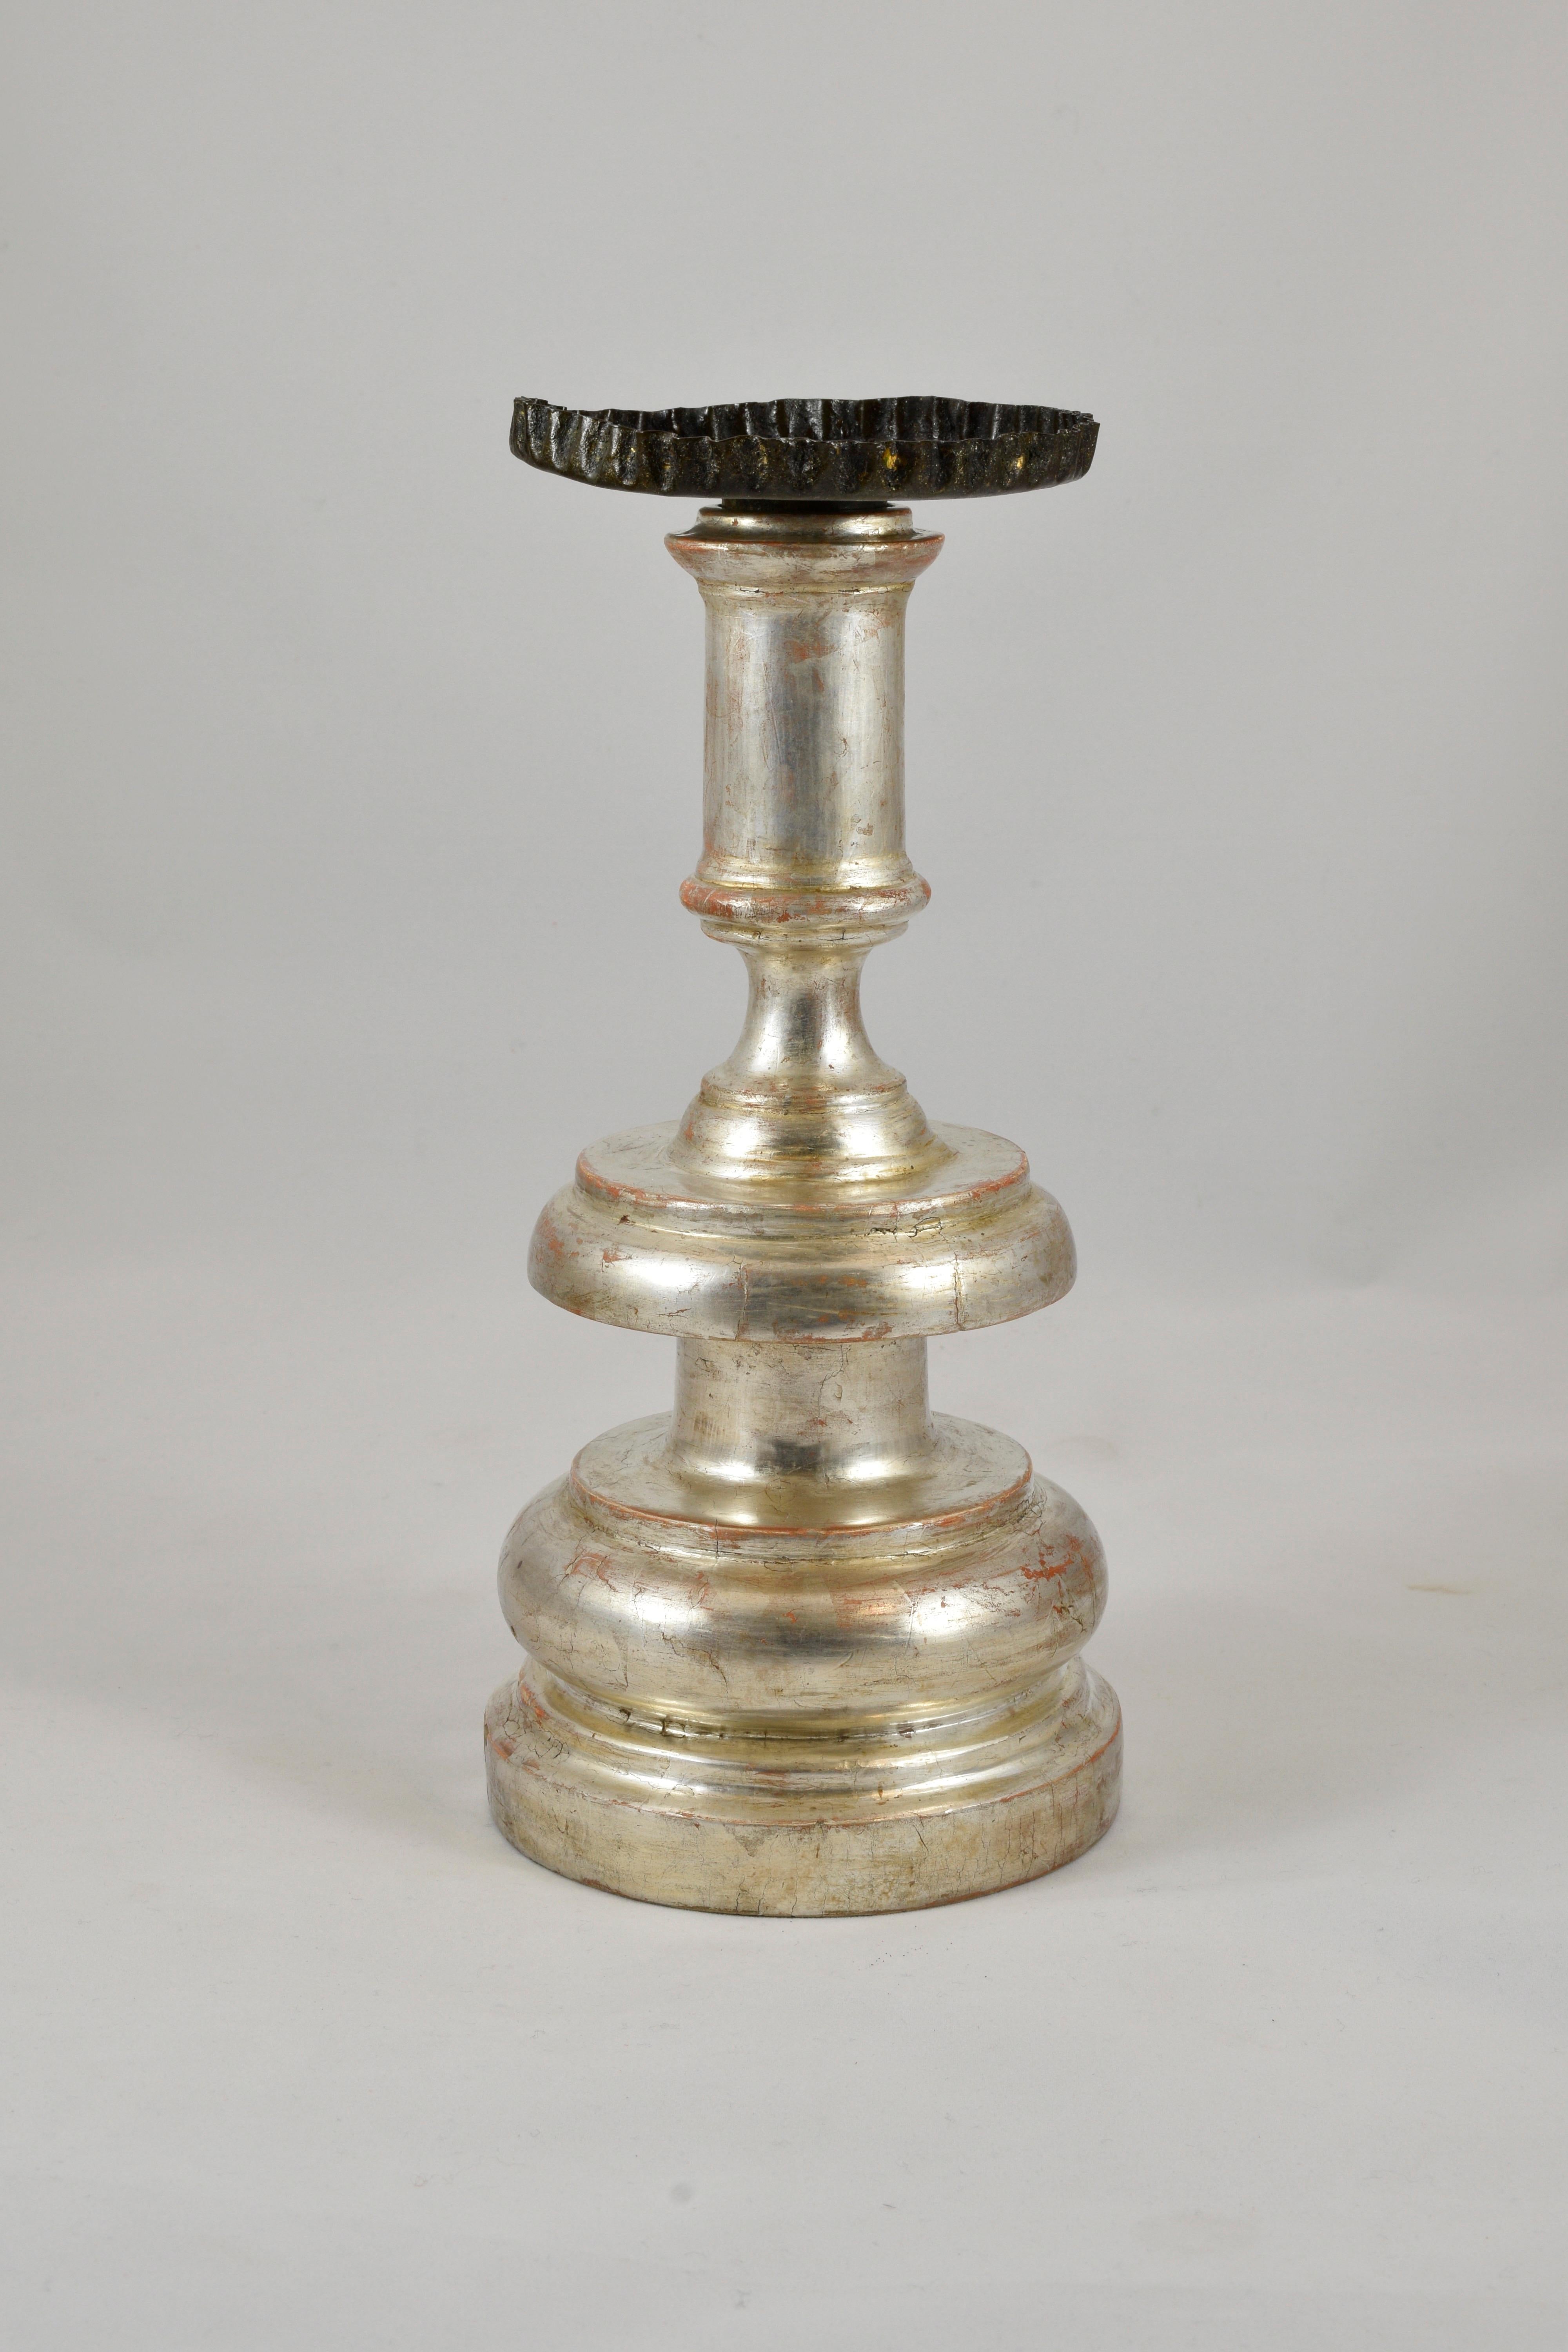 Italy, Firenze, late 17th century
Simple but elegant typical Florentine candlestick.
It has cracks and small lacks of the pinstripe typical of high-epoch items.